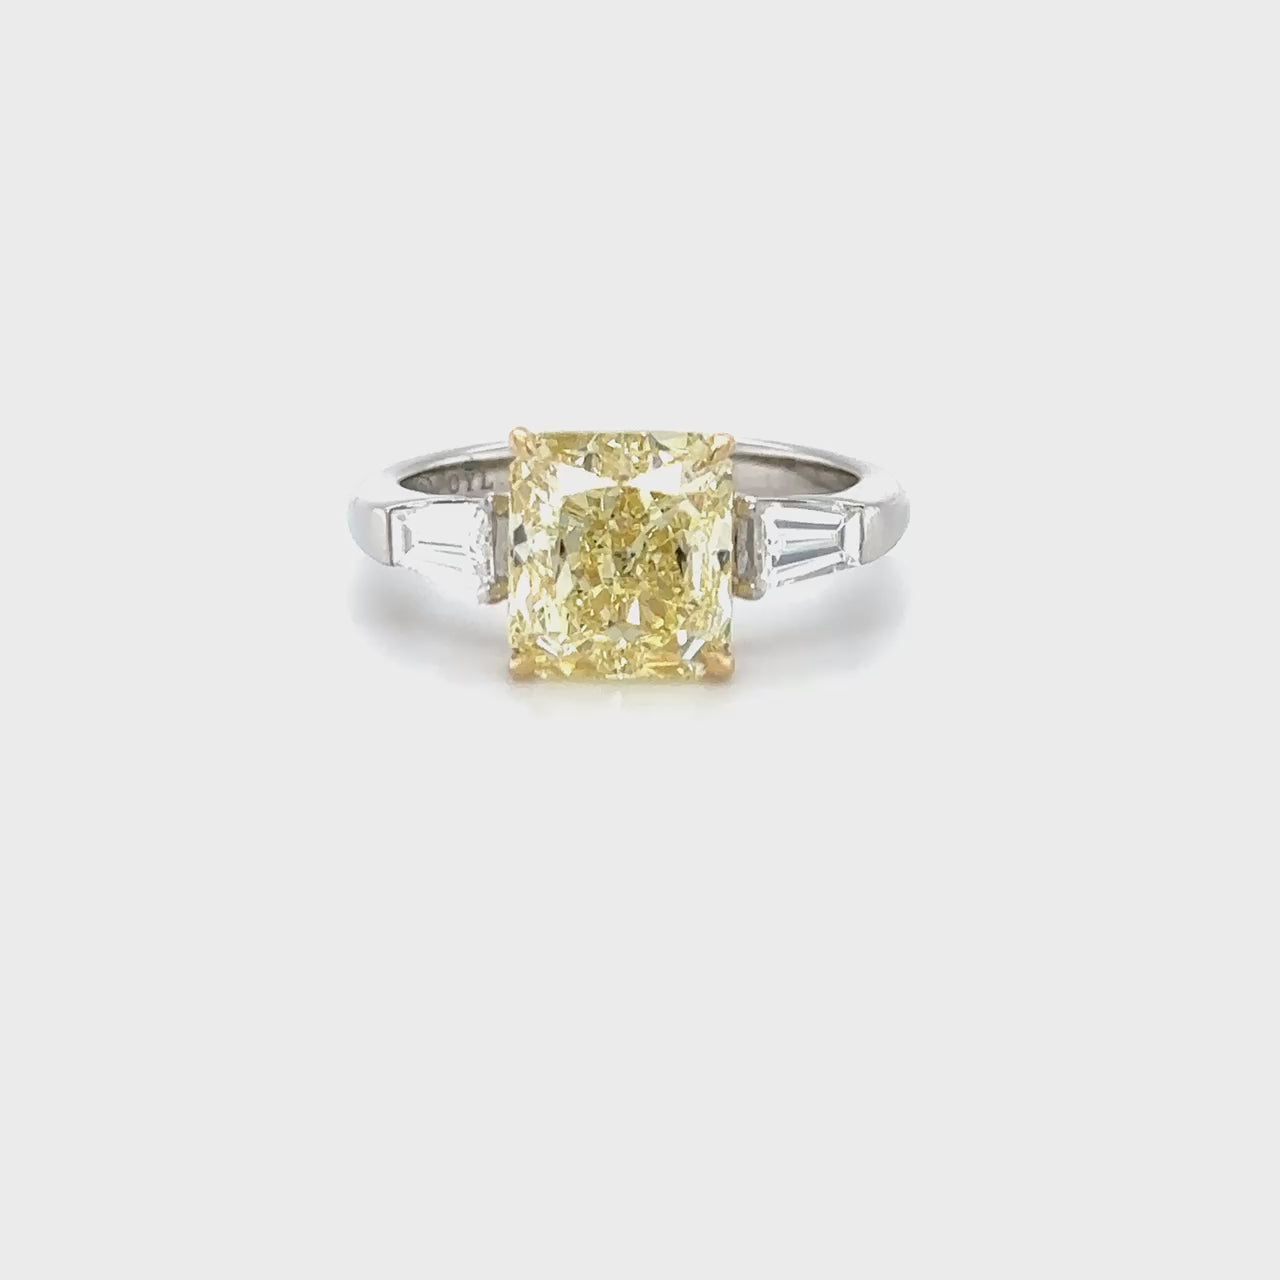 "Radiant cut diamond ring," "Tapered baguette diamond ring," "Trilogy diamond ring,"